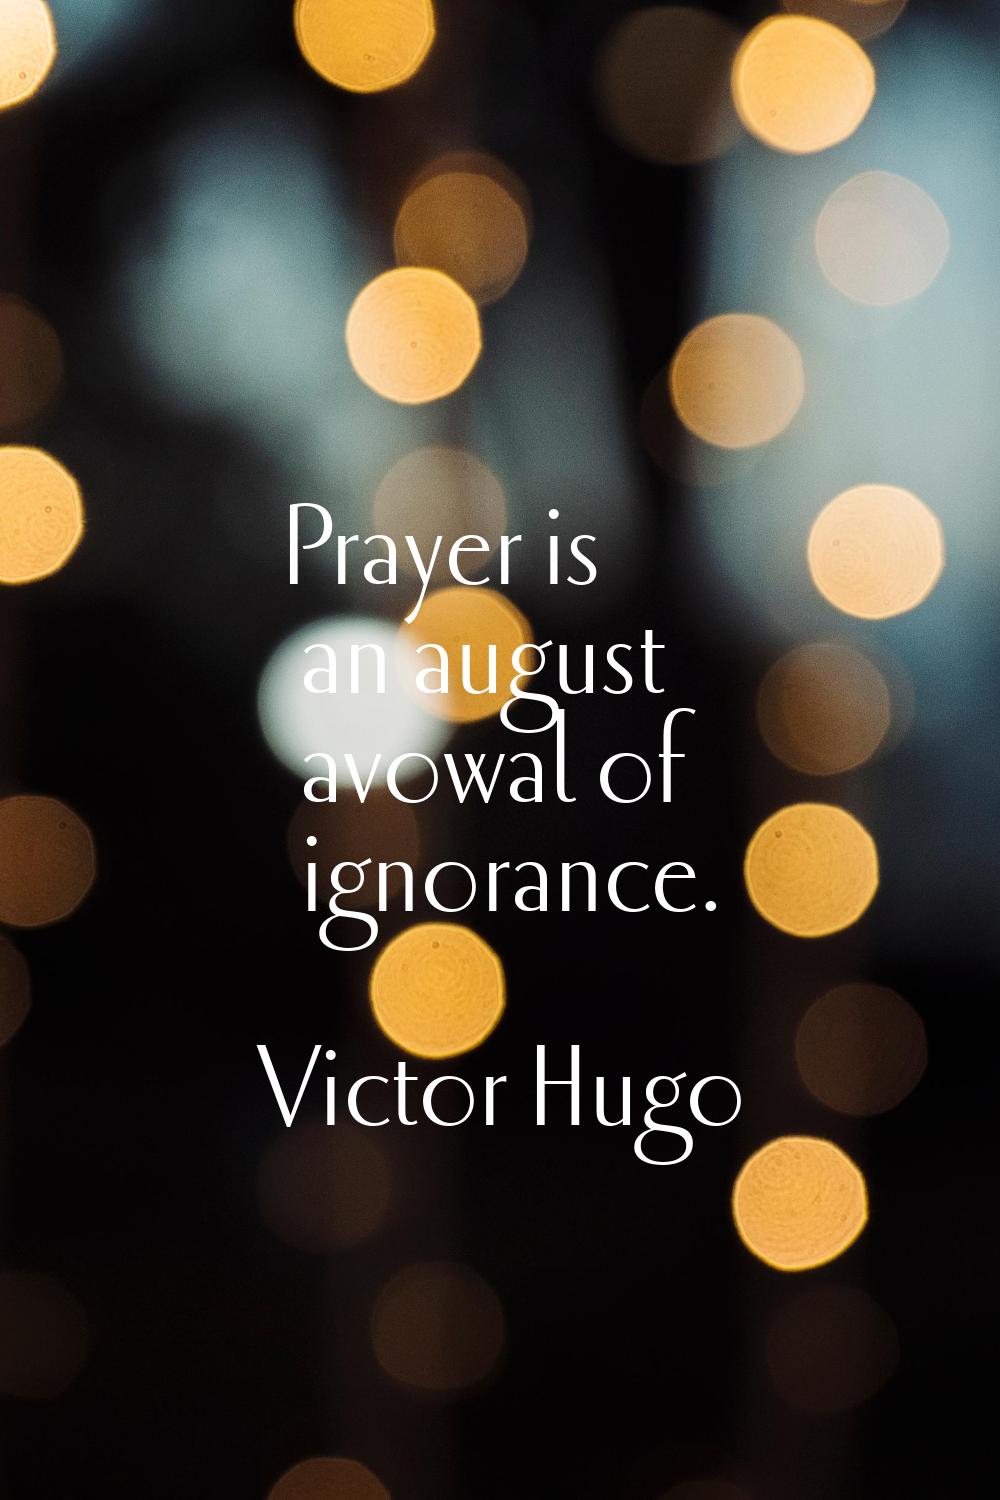 Prayer is an august avowal of ignorance.